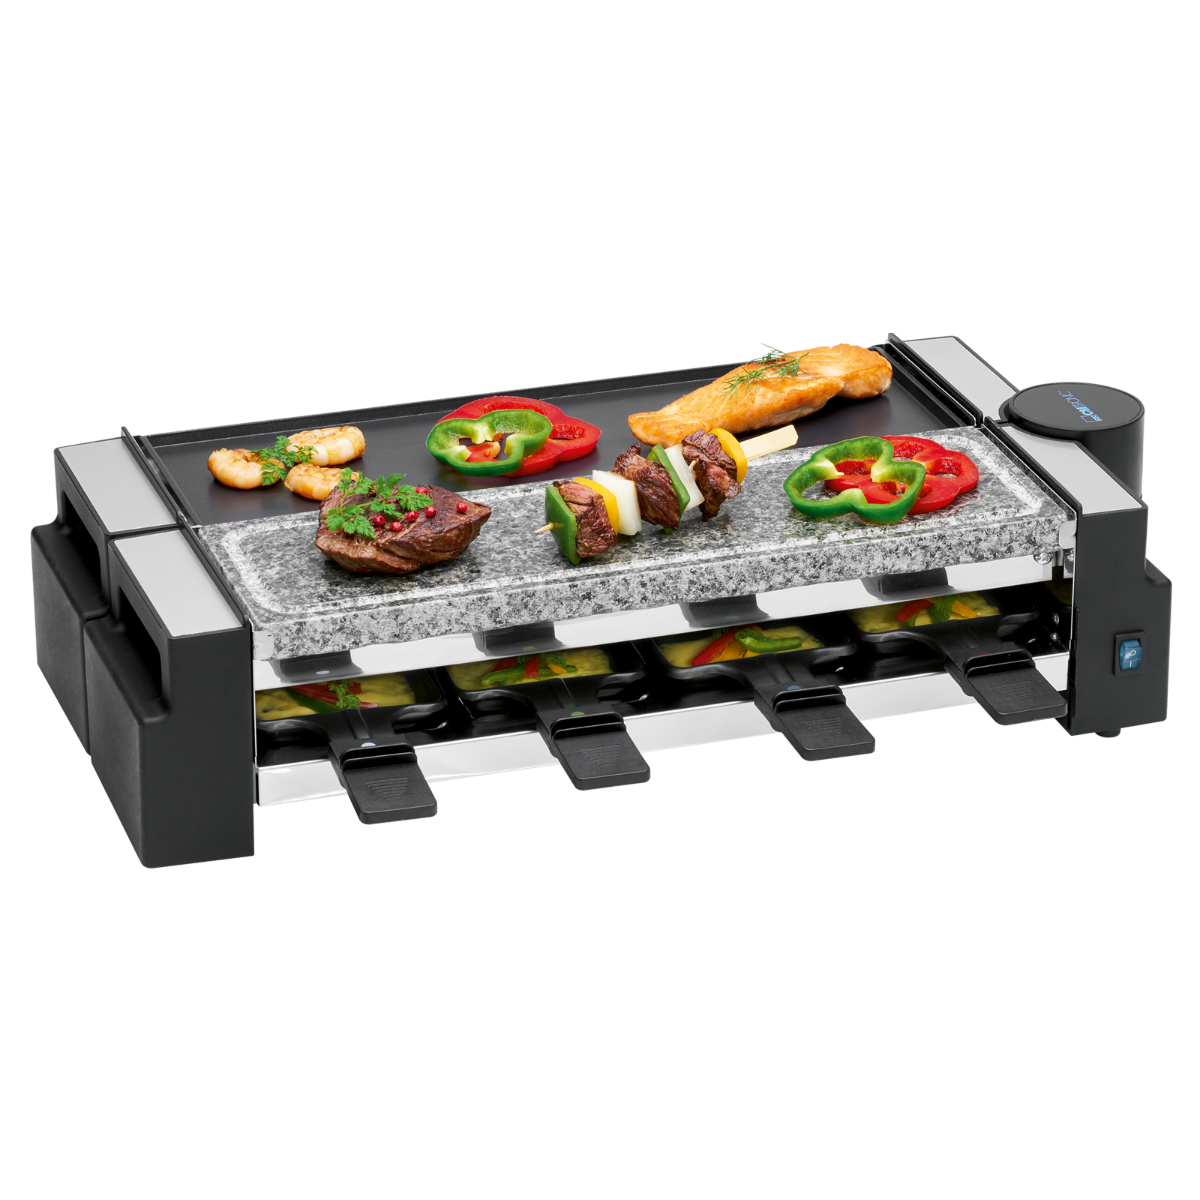 Raclette-Grill 3678 RG CLATRONIC